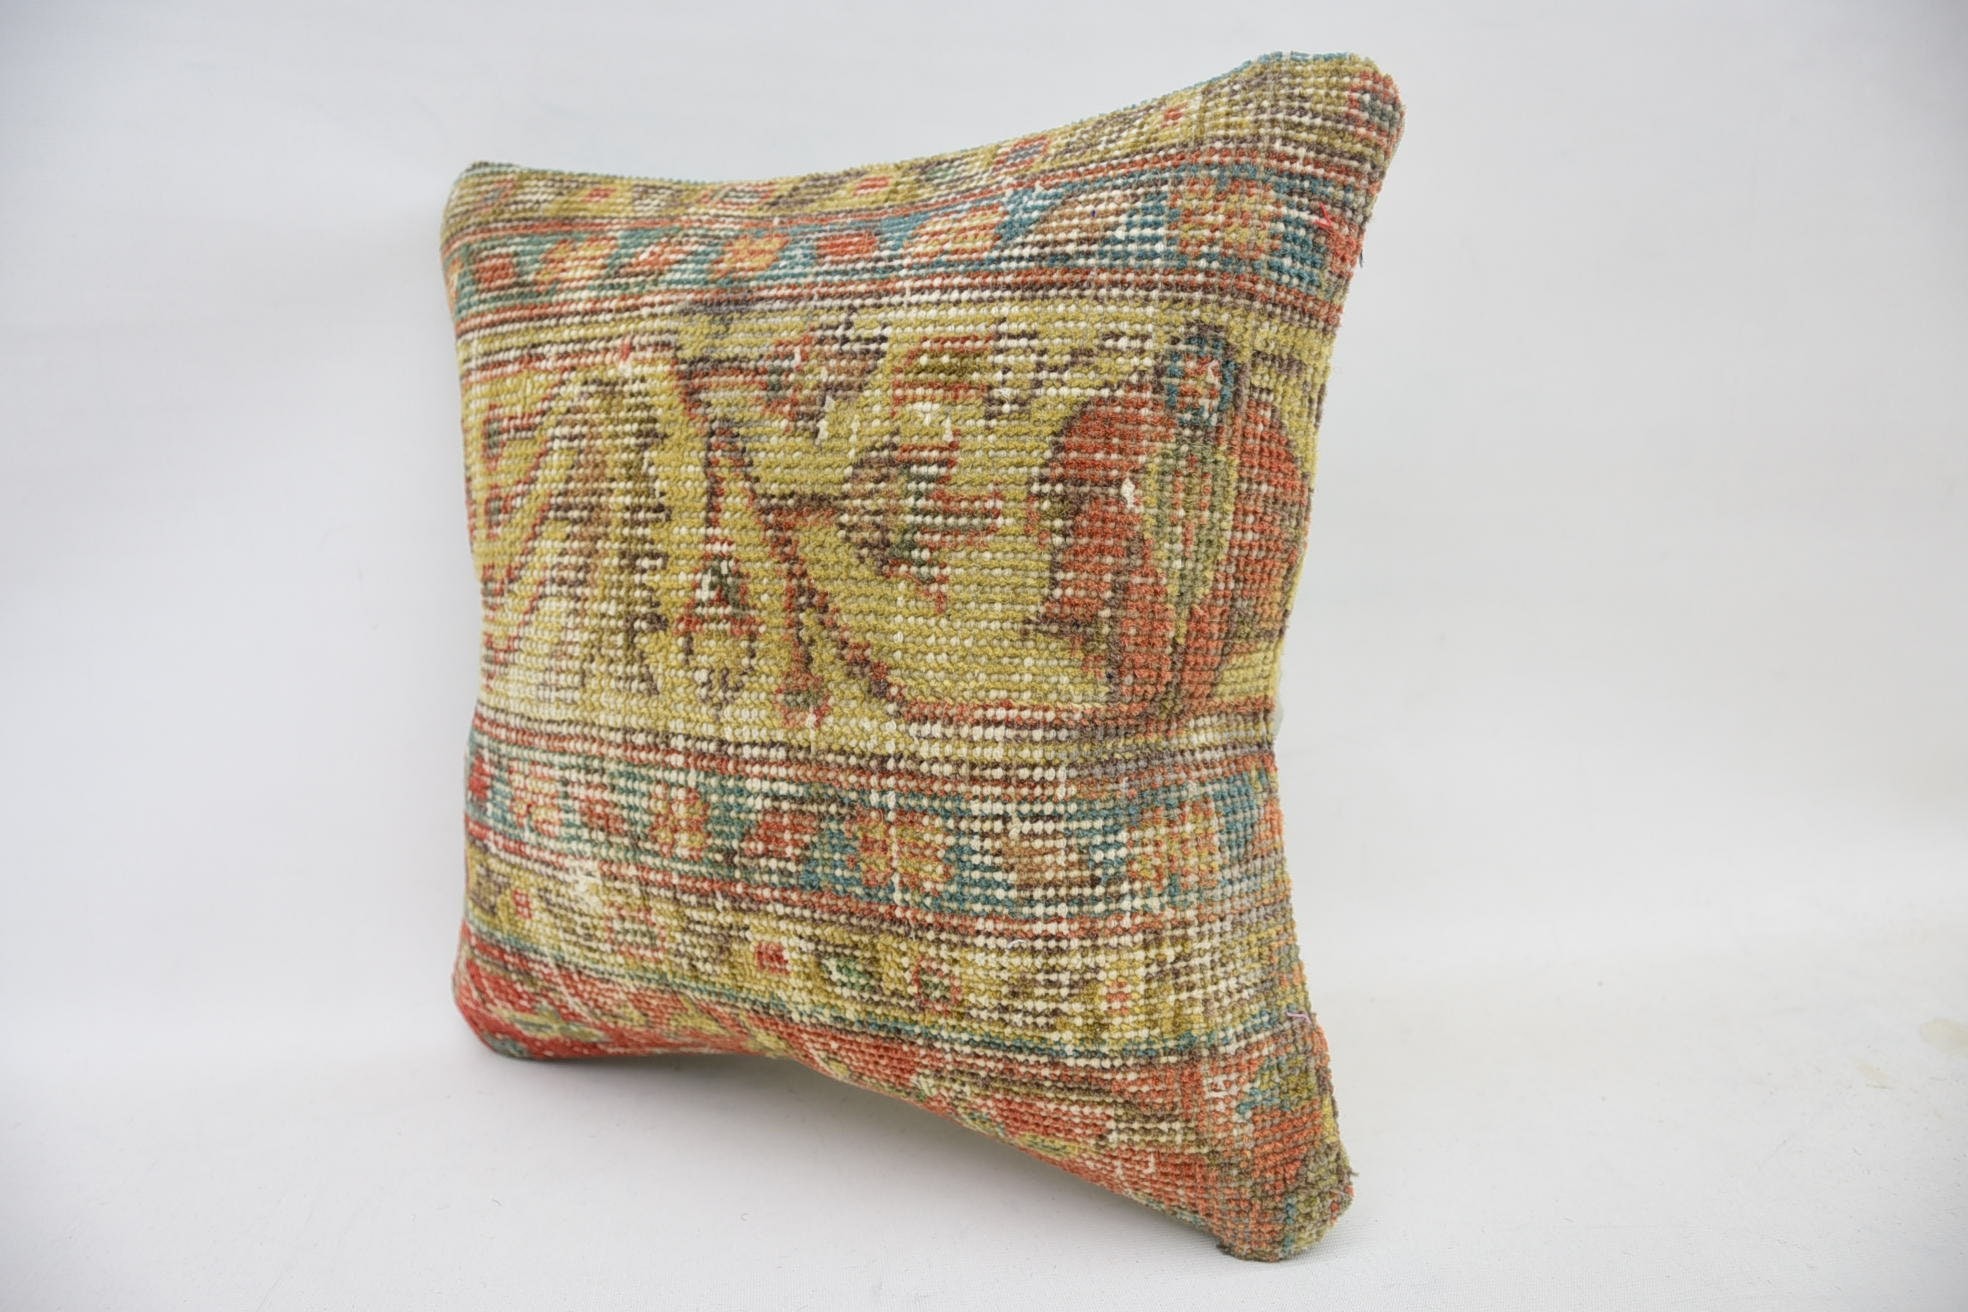 Garden Pillow, Tapestry Pillow Cover, Gift Pillow, Pillow for Couch, 14"x14" Yellow Cushion, Lounge Throw Cushion, Vintage Pillow